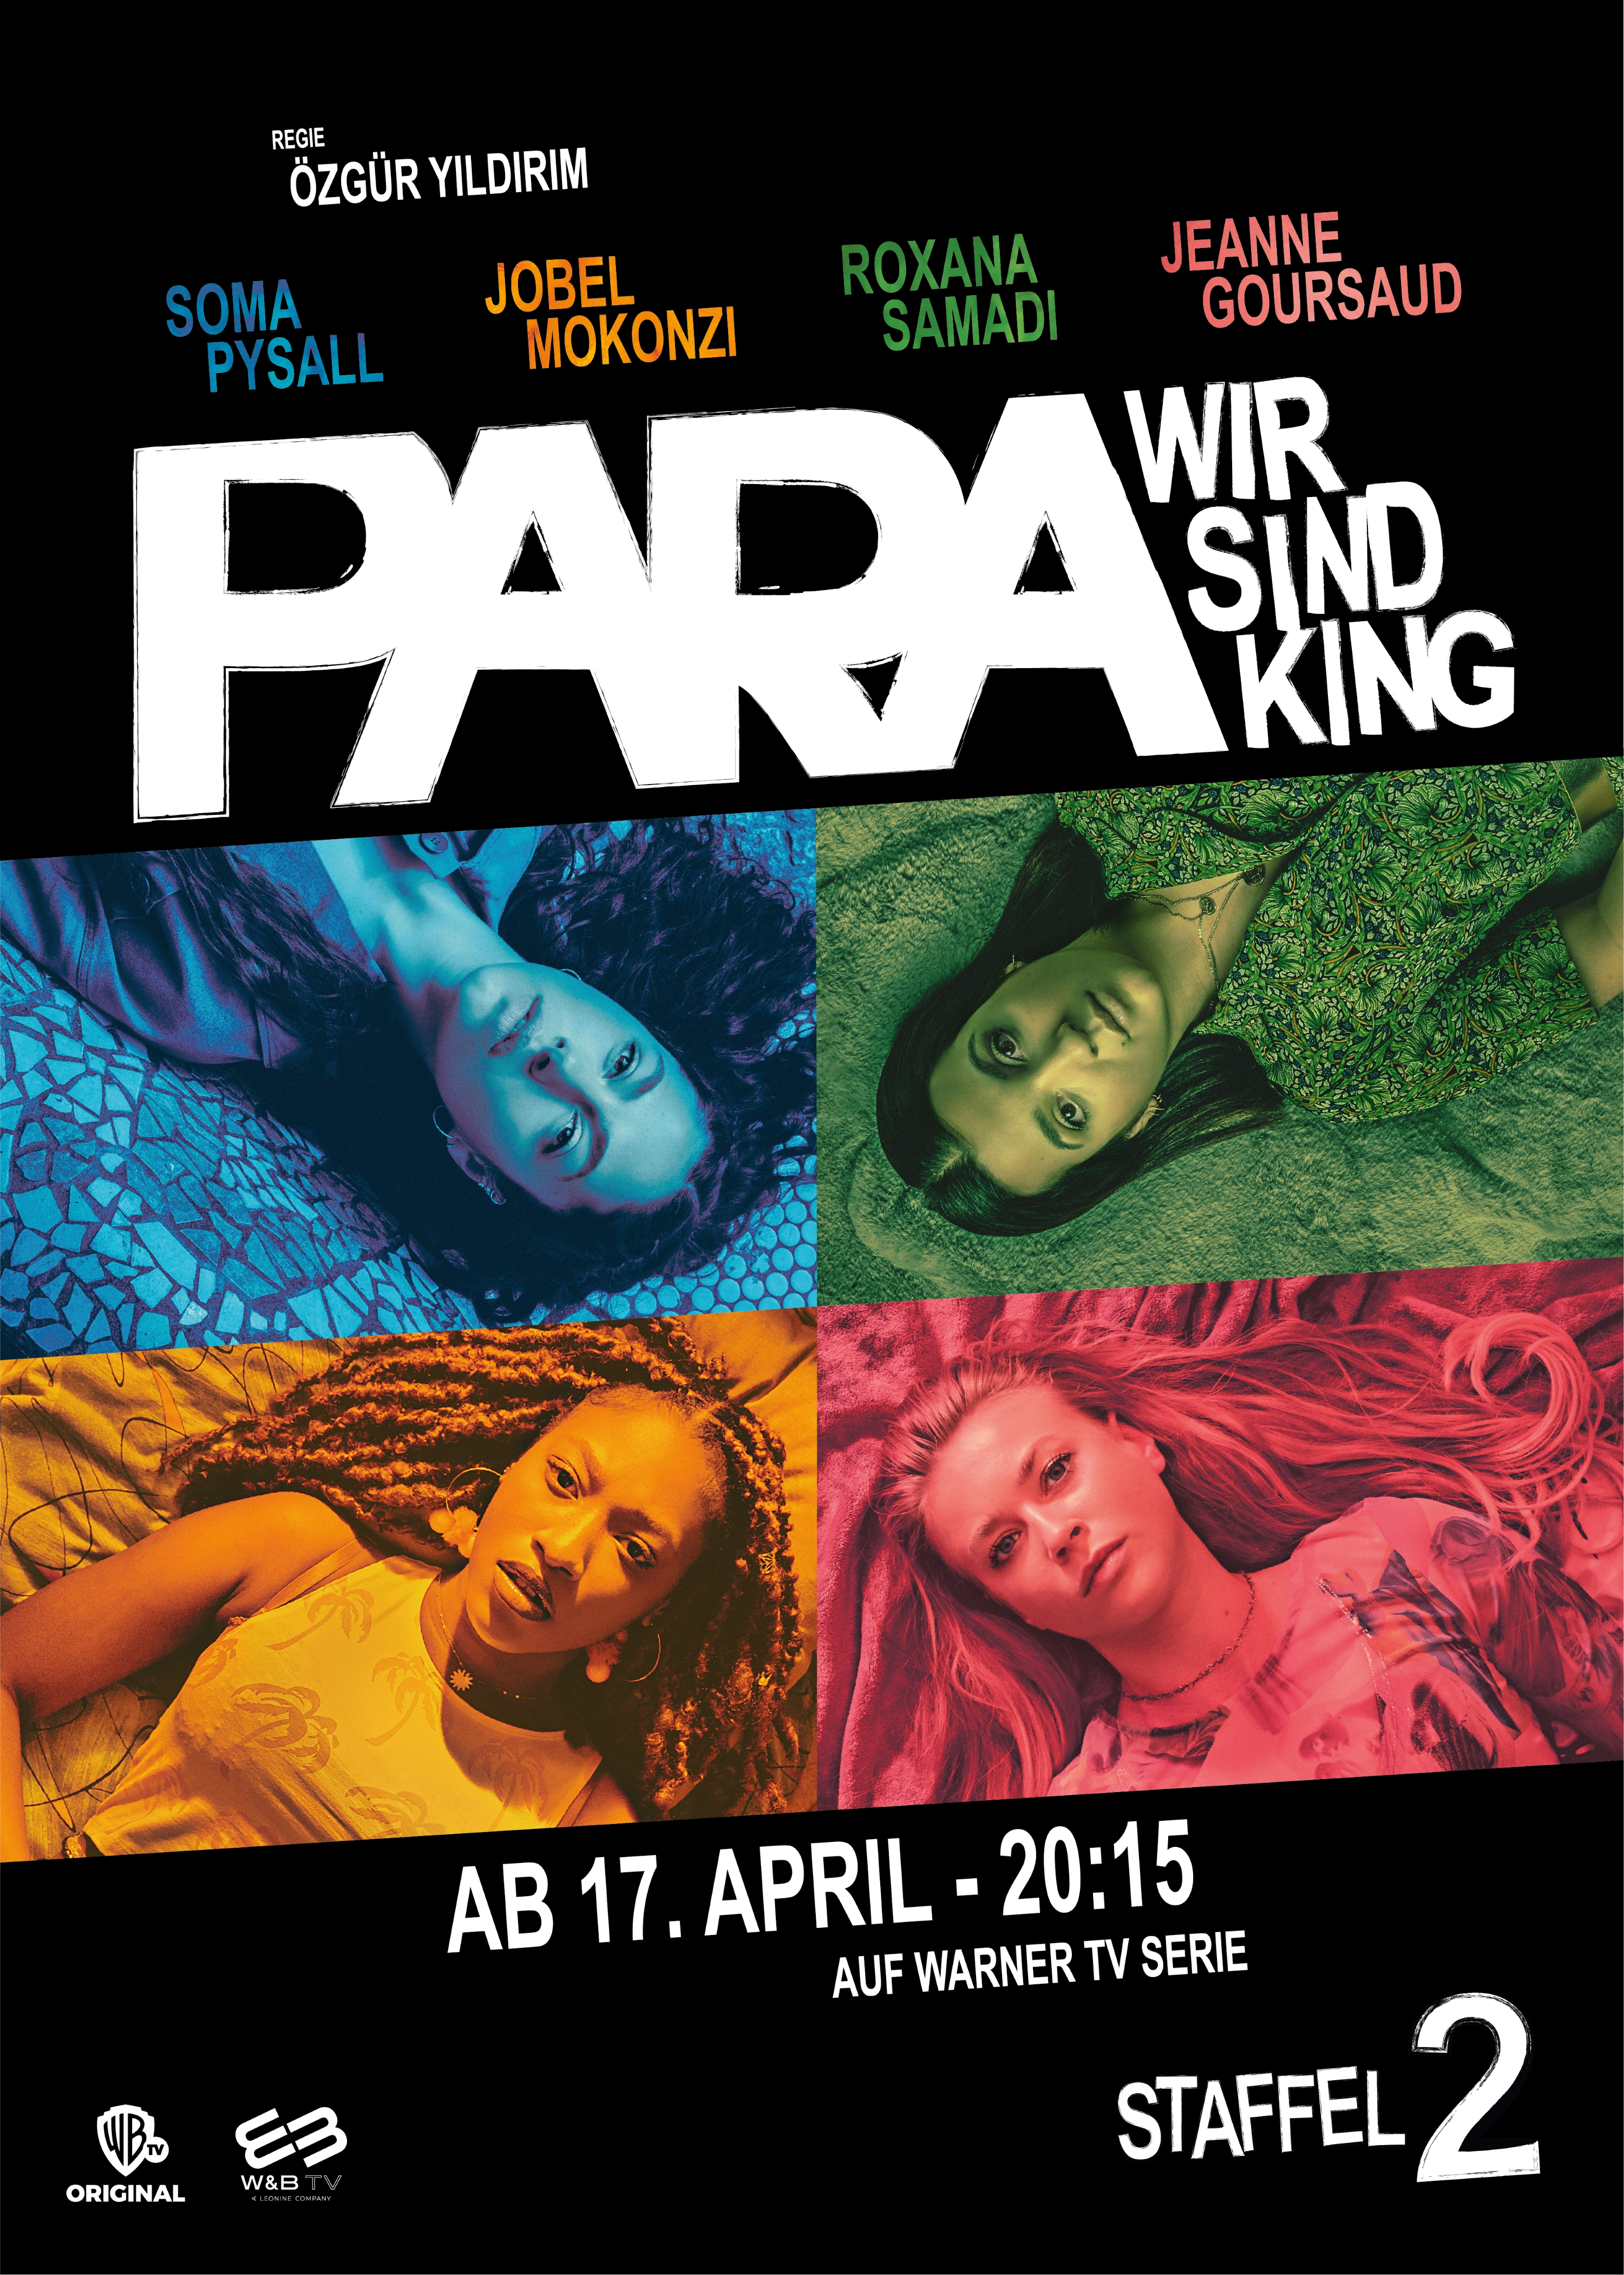 Para – We Are King